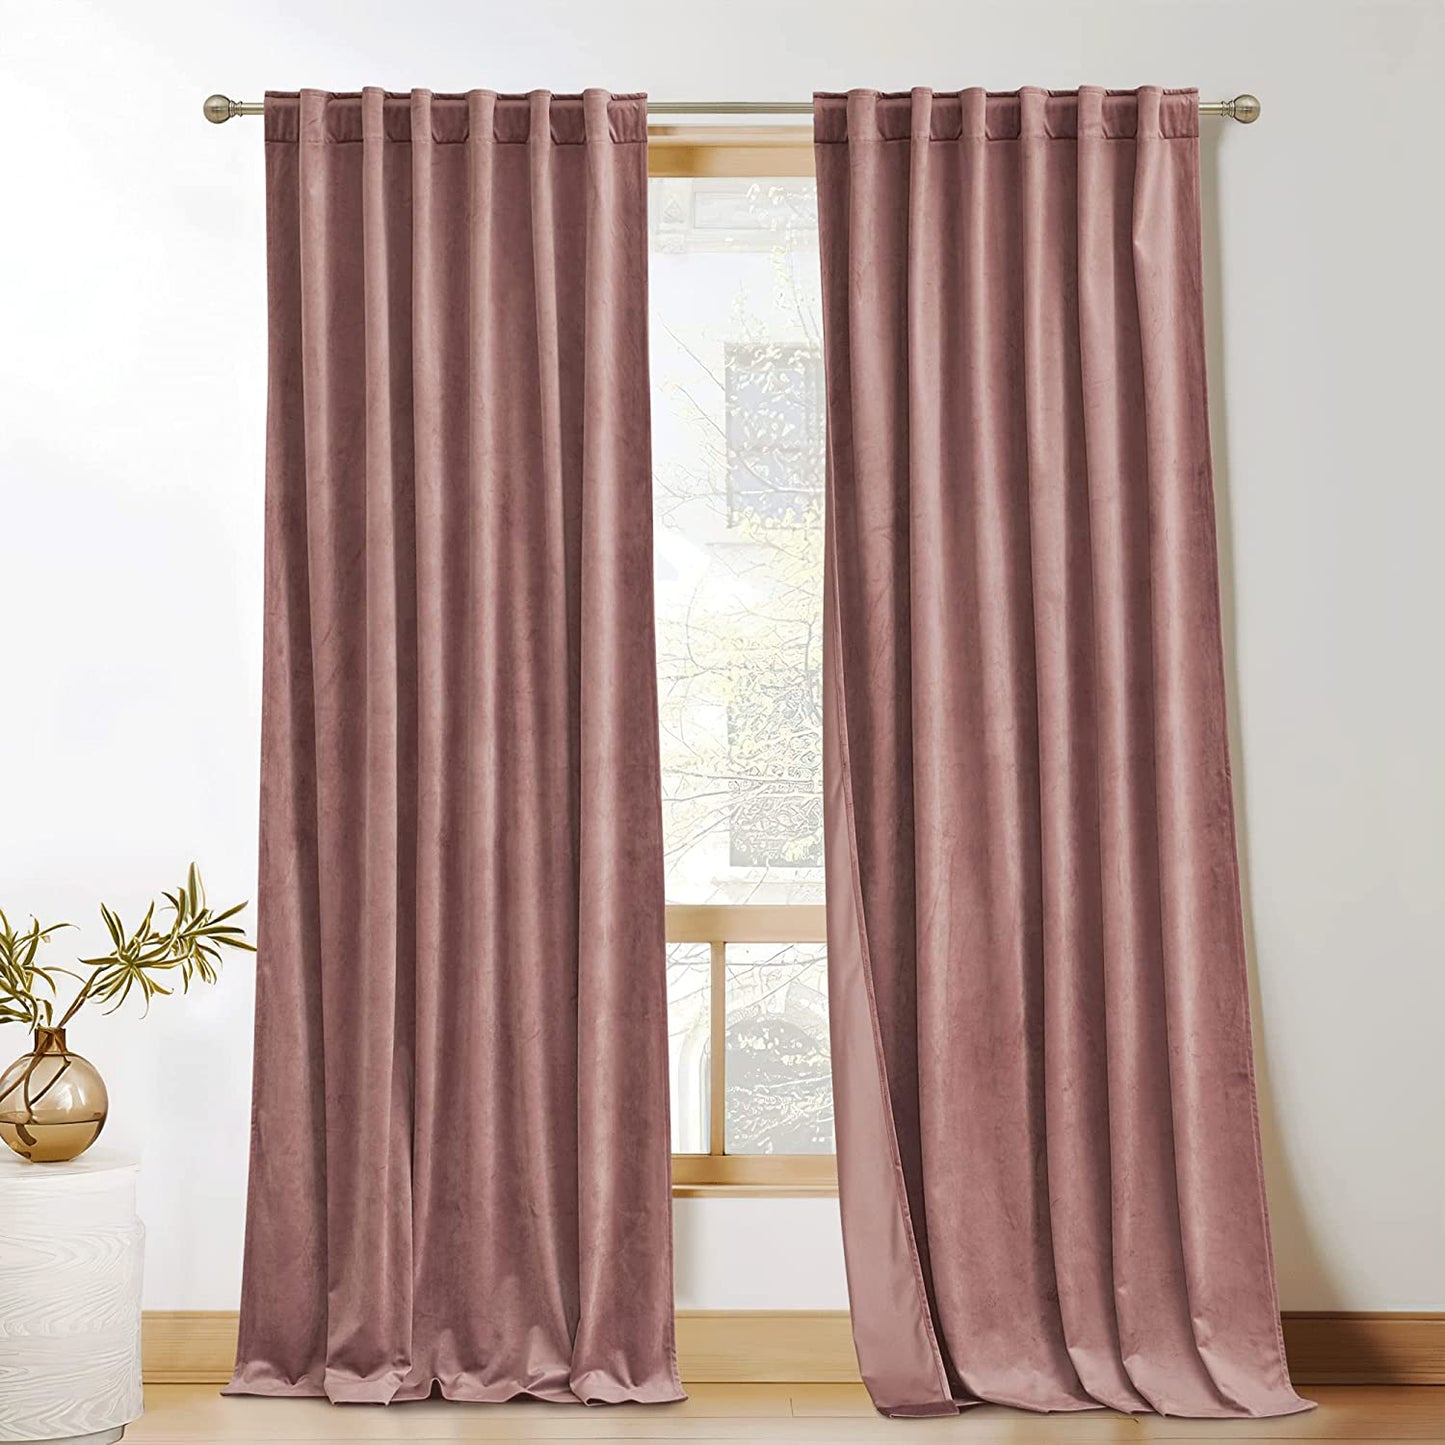 KGORGE Green Velvet Curtains 84 Inches Super Soft Room Darkening Thermal Insulating Window Curtains & Drapes for Bedroom Living Room Backdrop Holiday Christmas Decor, Hunter Green, W 52 X L 84, 2 Pcs  KGORGE Wild Rose W 52 X L 96 